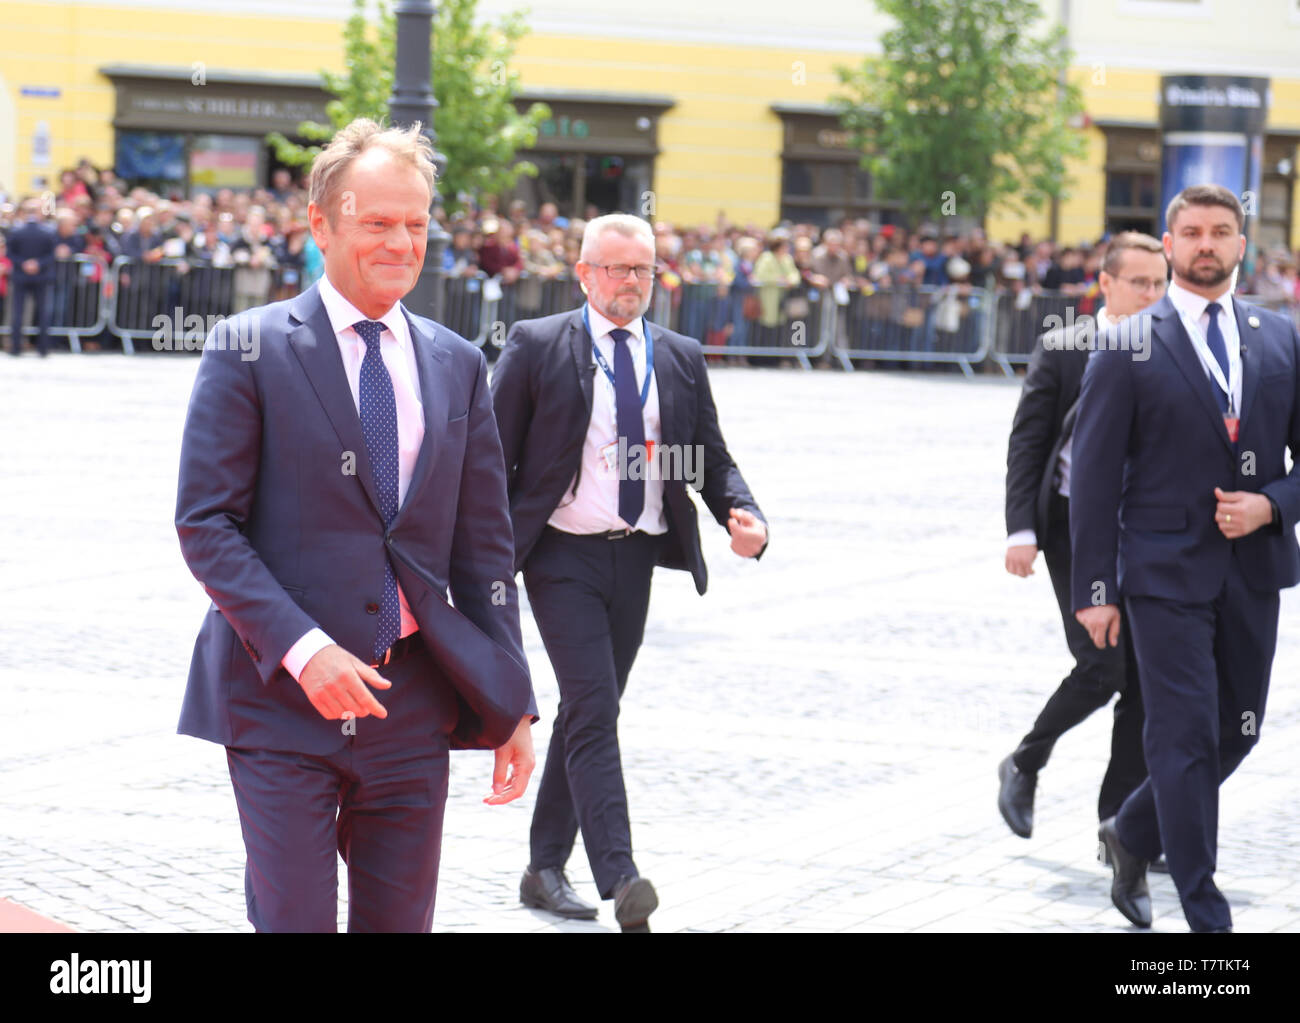 Sibiu, Romania. 9th May, 2019. European Council President Donald Tusk (L, front) arrives in the Grand Square in front of the Sibiu City Hall to attend the European Union (EU) informal summit in Sibiu, Romania, May 9, 2019. The leaders of the EU member states on Thursday agreed on defending 'one Europe' and upholding the rules-based international order in their '10 commitments' declaration, made at an informal summit in Sibiu. Credit: Chen Jin/Xinhua/Alamy Live News Stock Photo